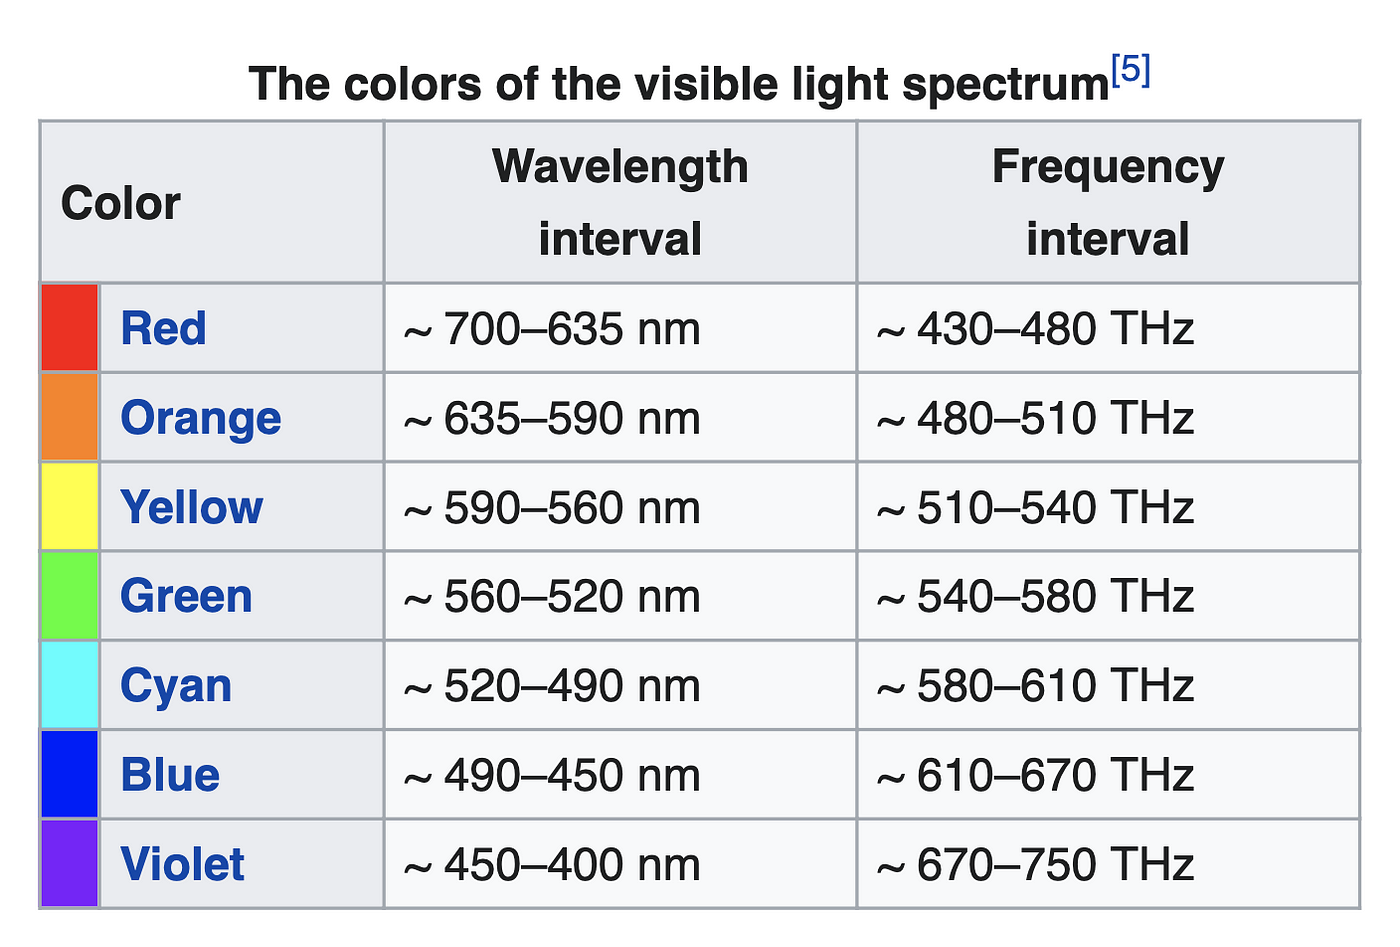 Table listing the wavelength ranges and frequency intervals of different colors.